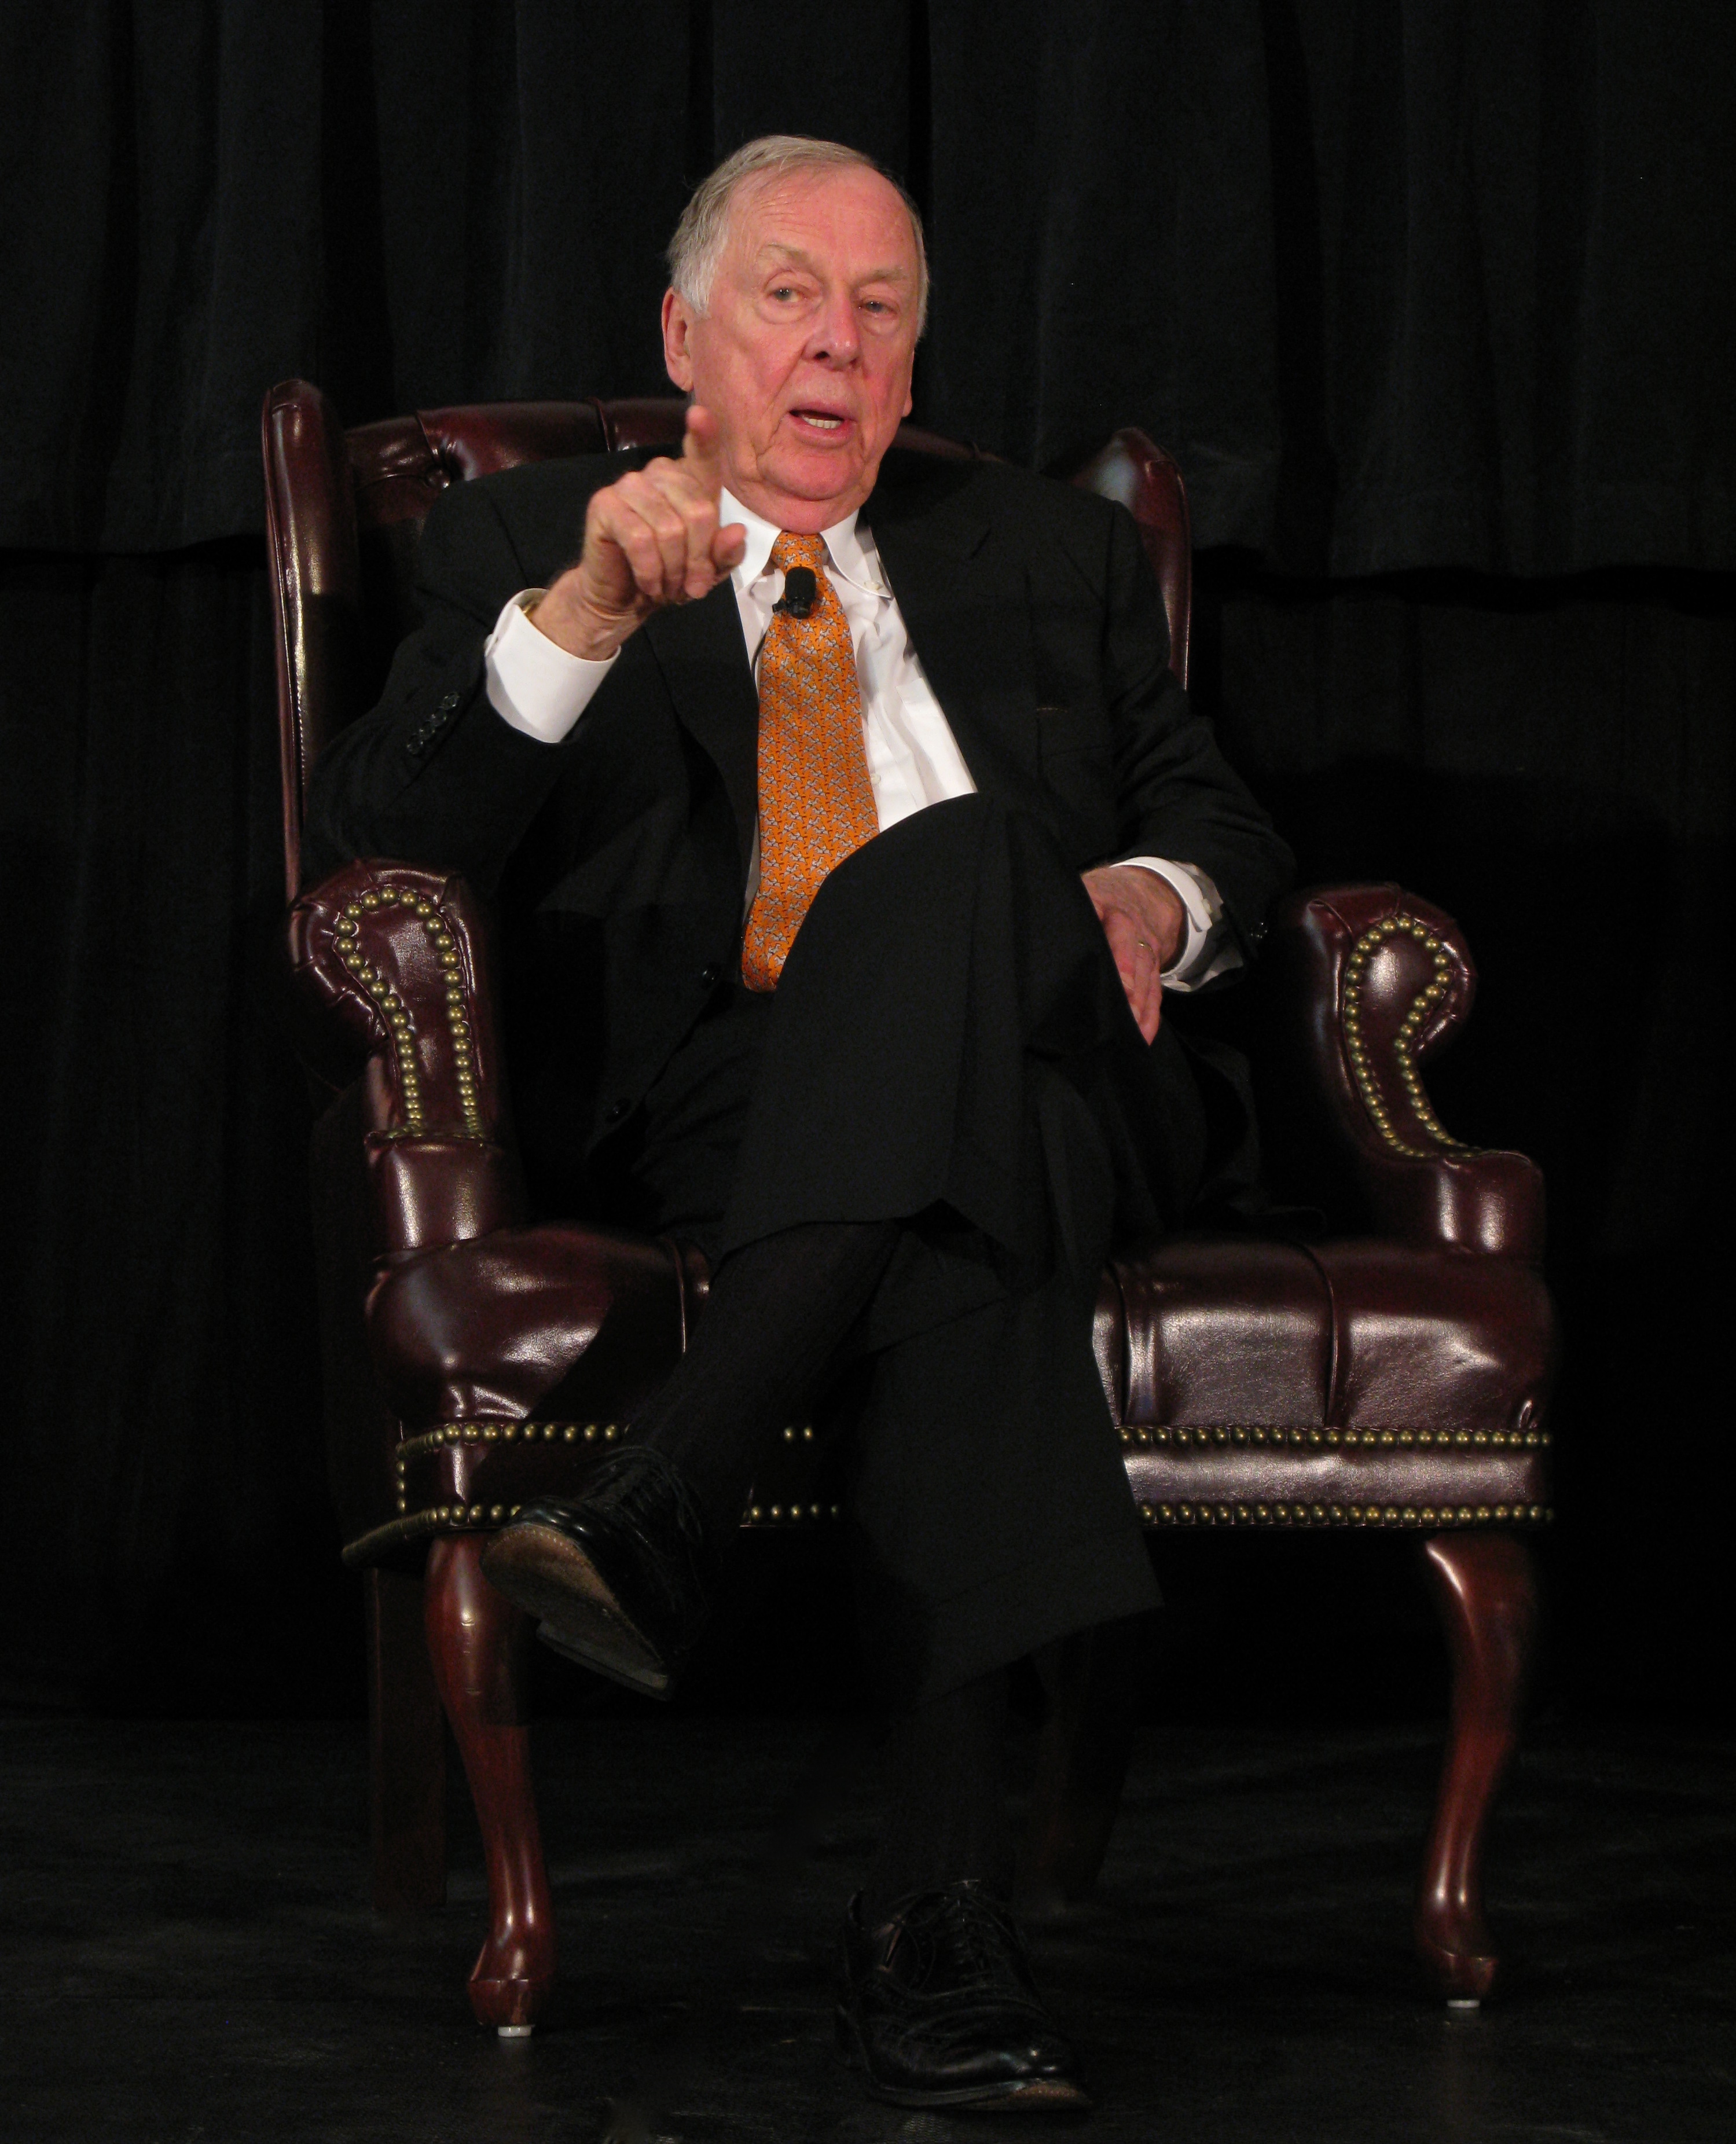 Energy tycoon T. Boone Pickens shares posthumous wise words